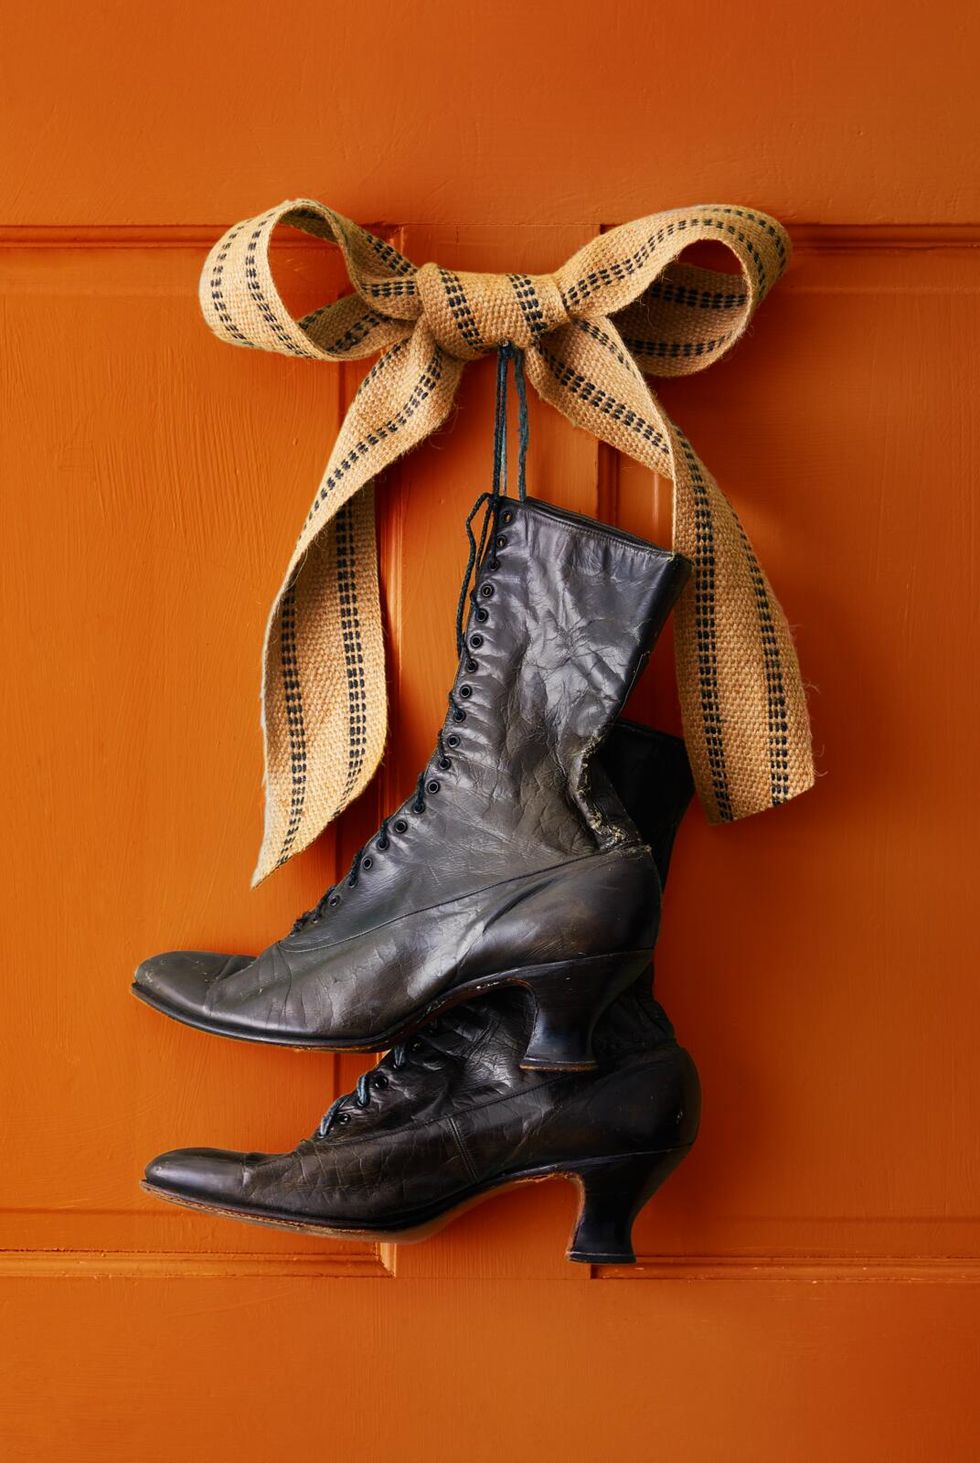 victorian style black boots hung on an orange door with a burlap bow in celebration of halloween